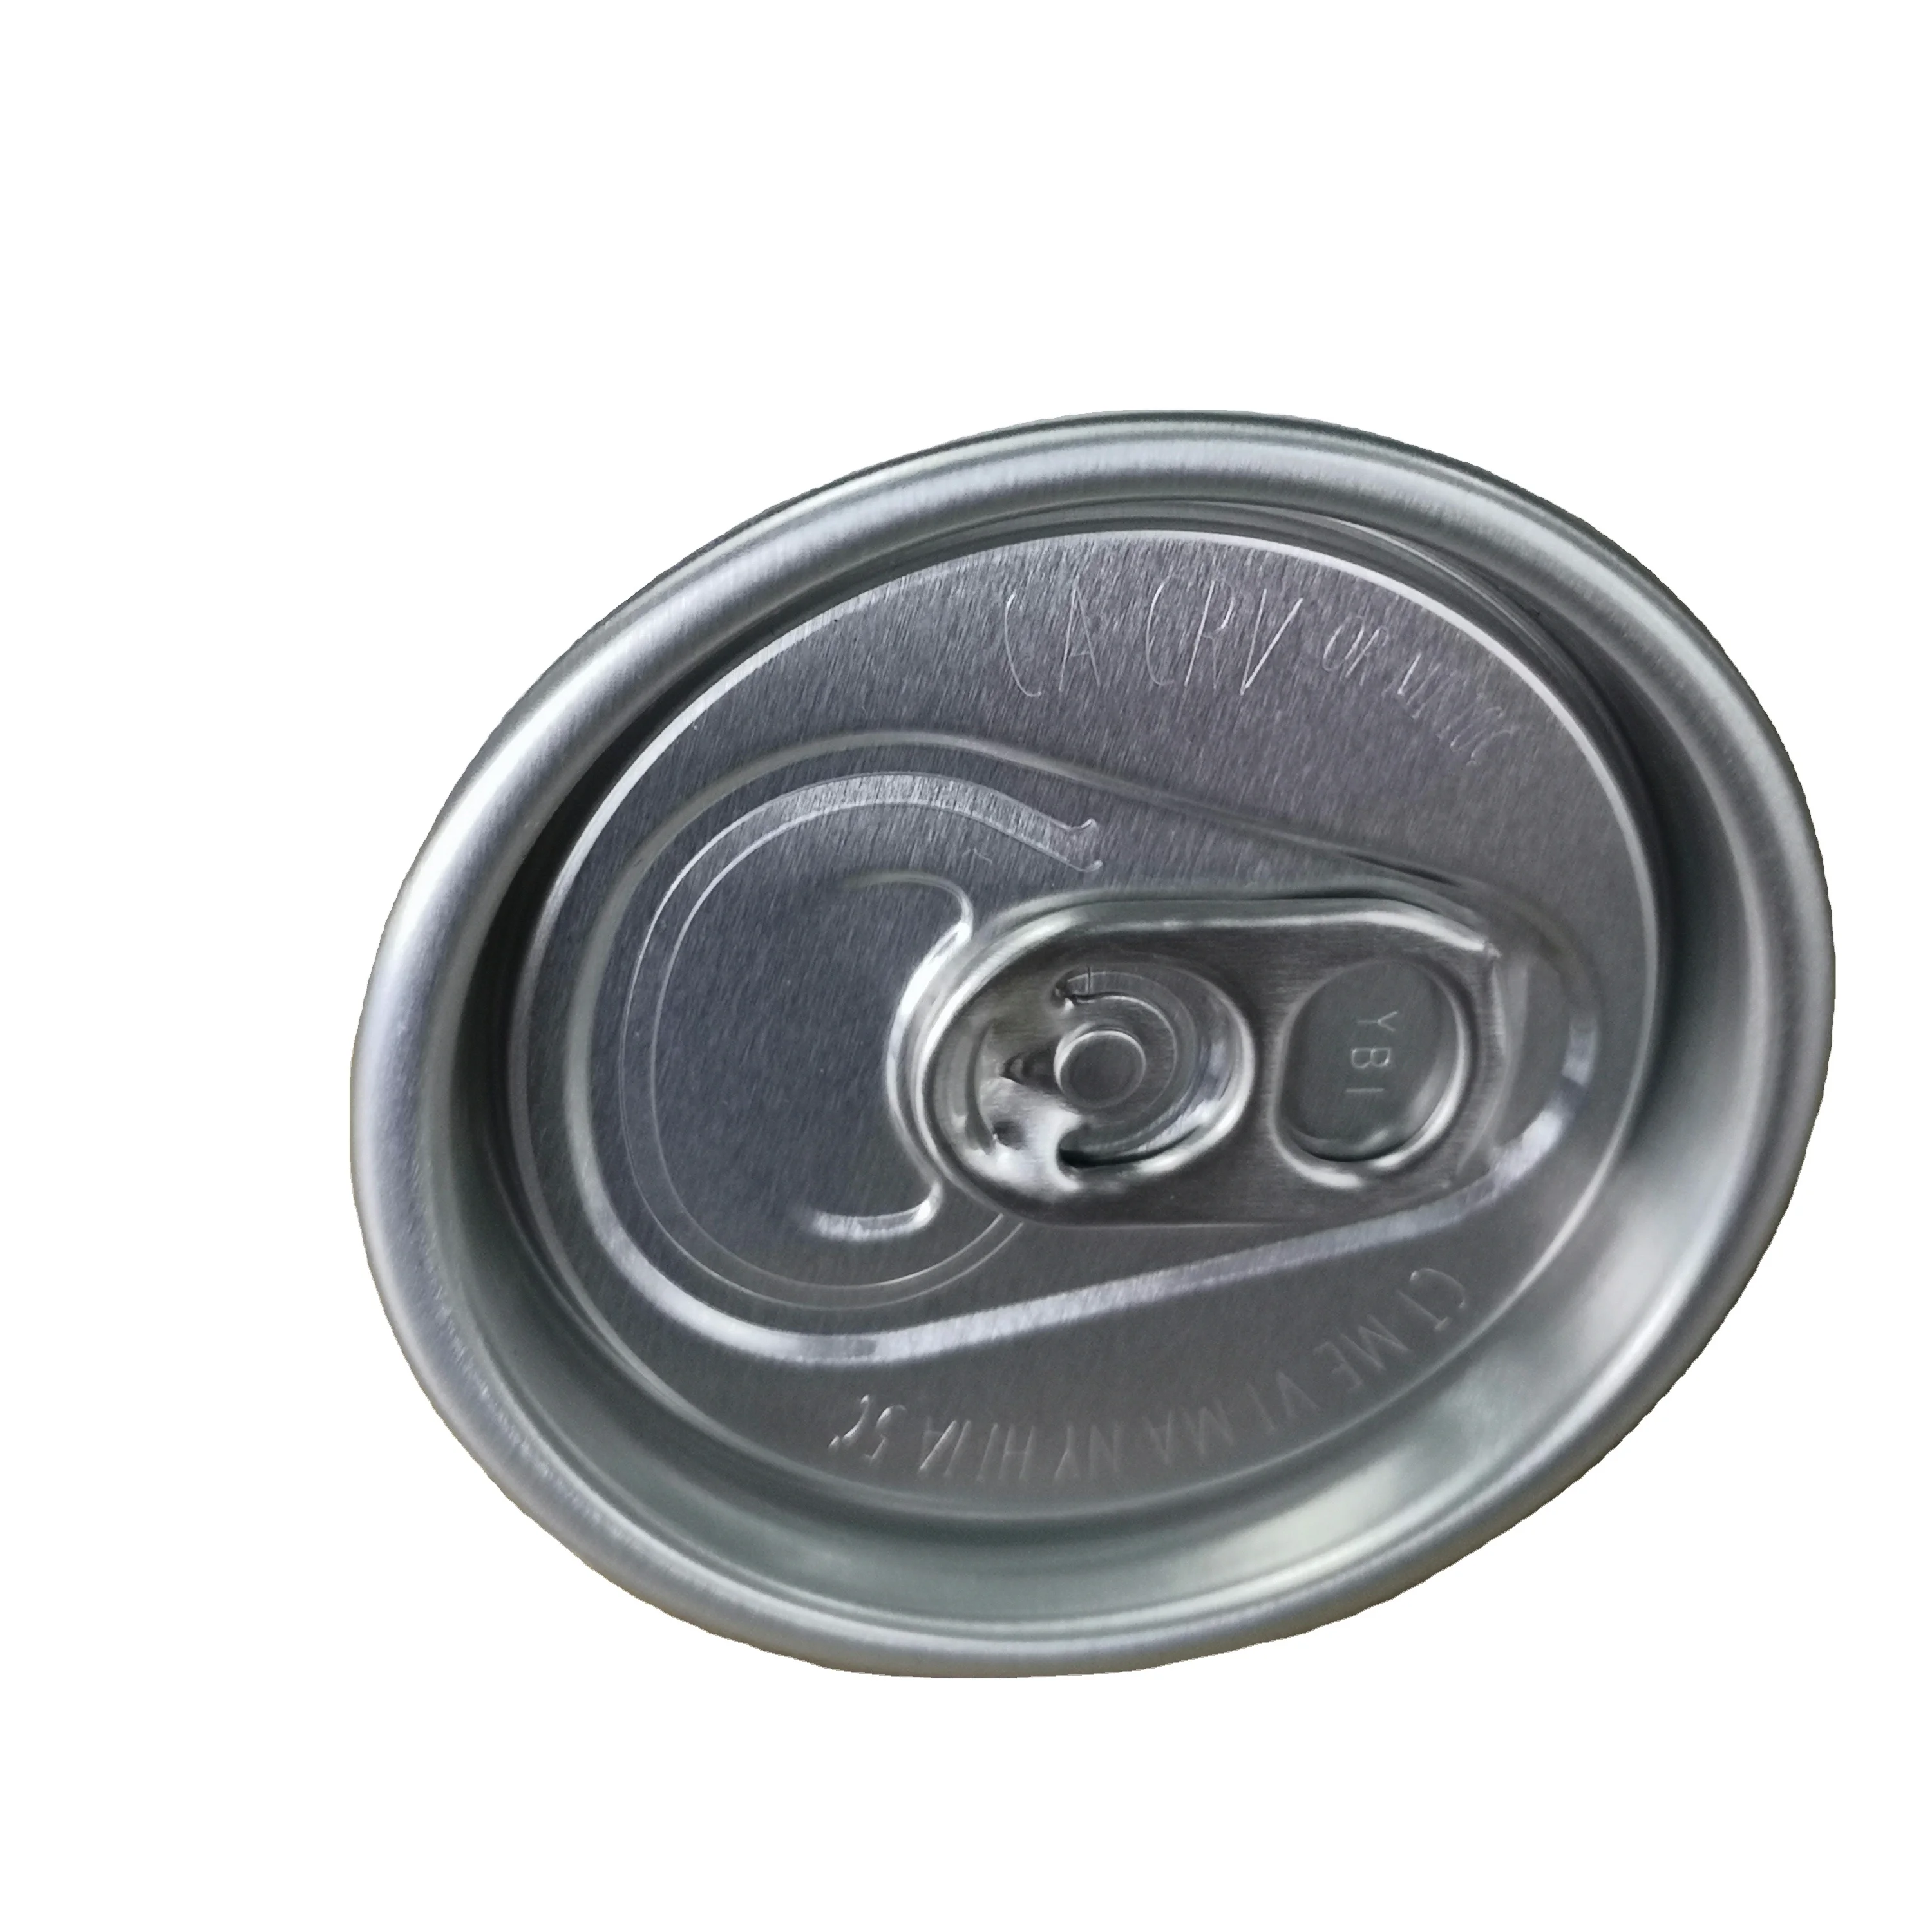 206# 58mm,aluminum lids for easy open cans,aluminum pull ring cap for food,juice,beer,sauce